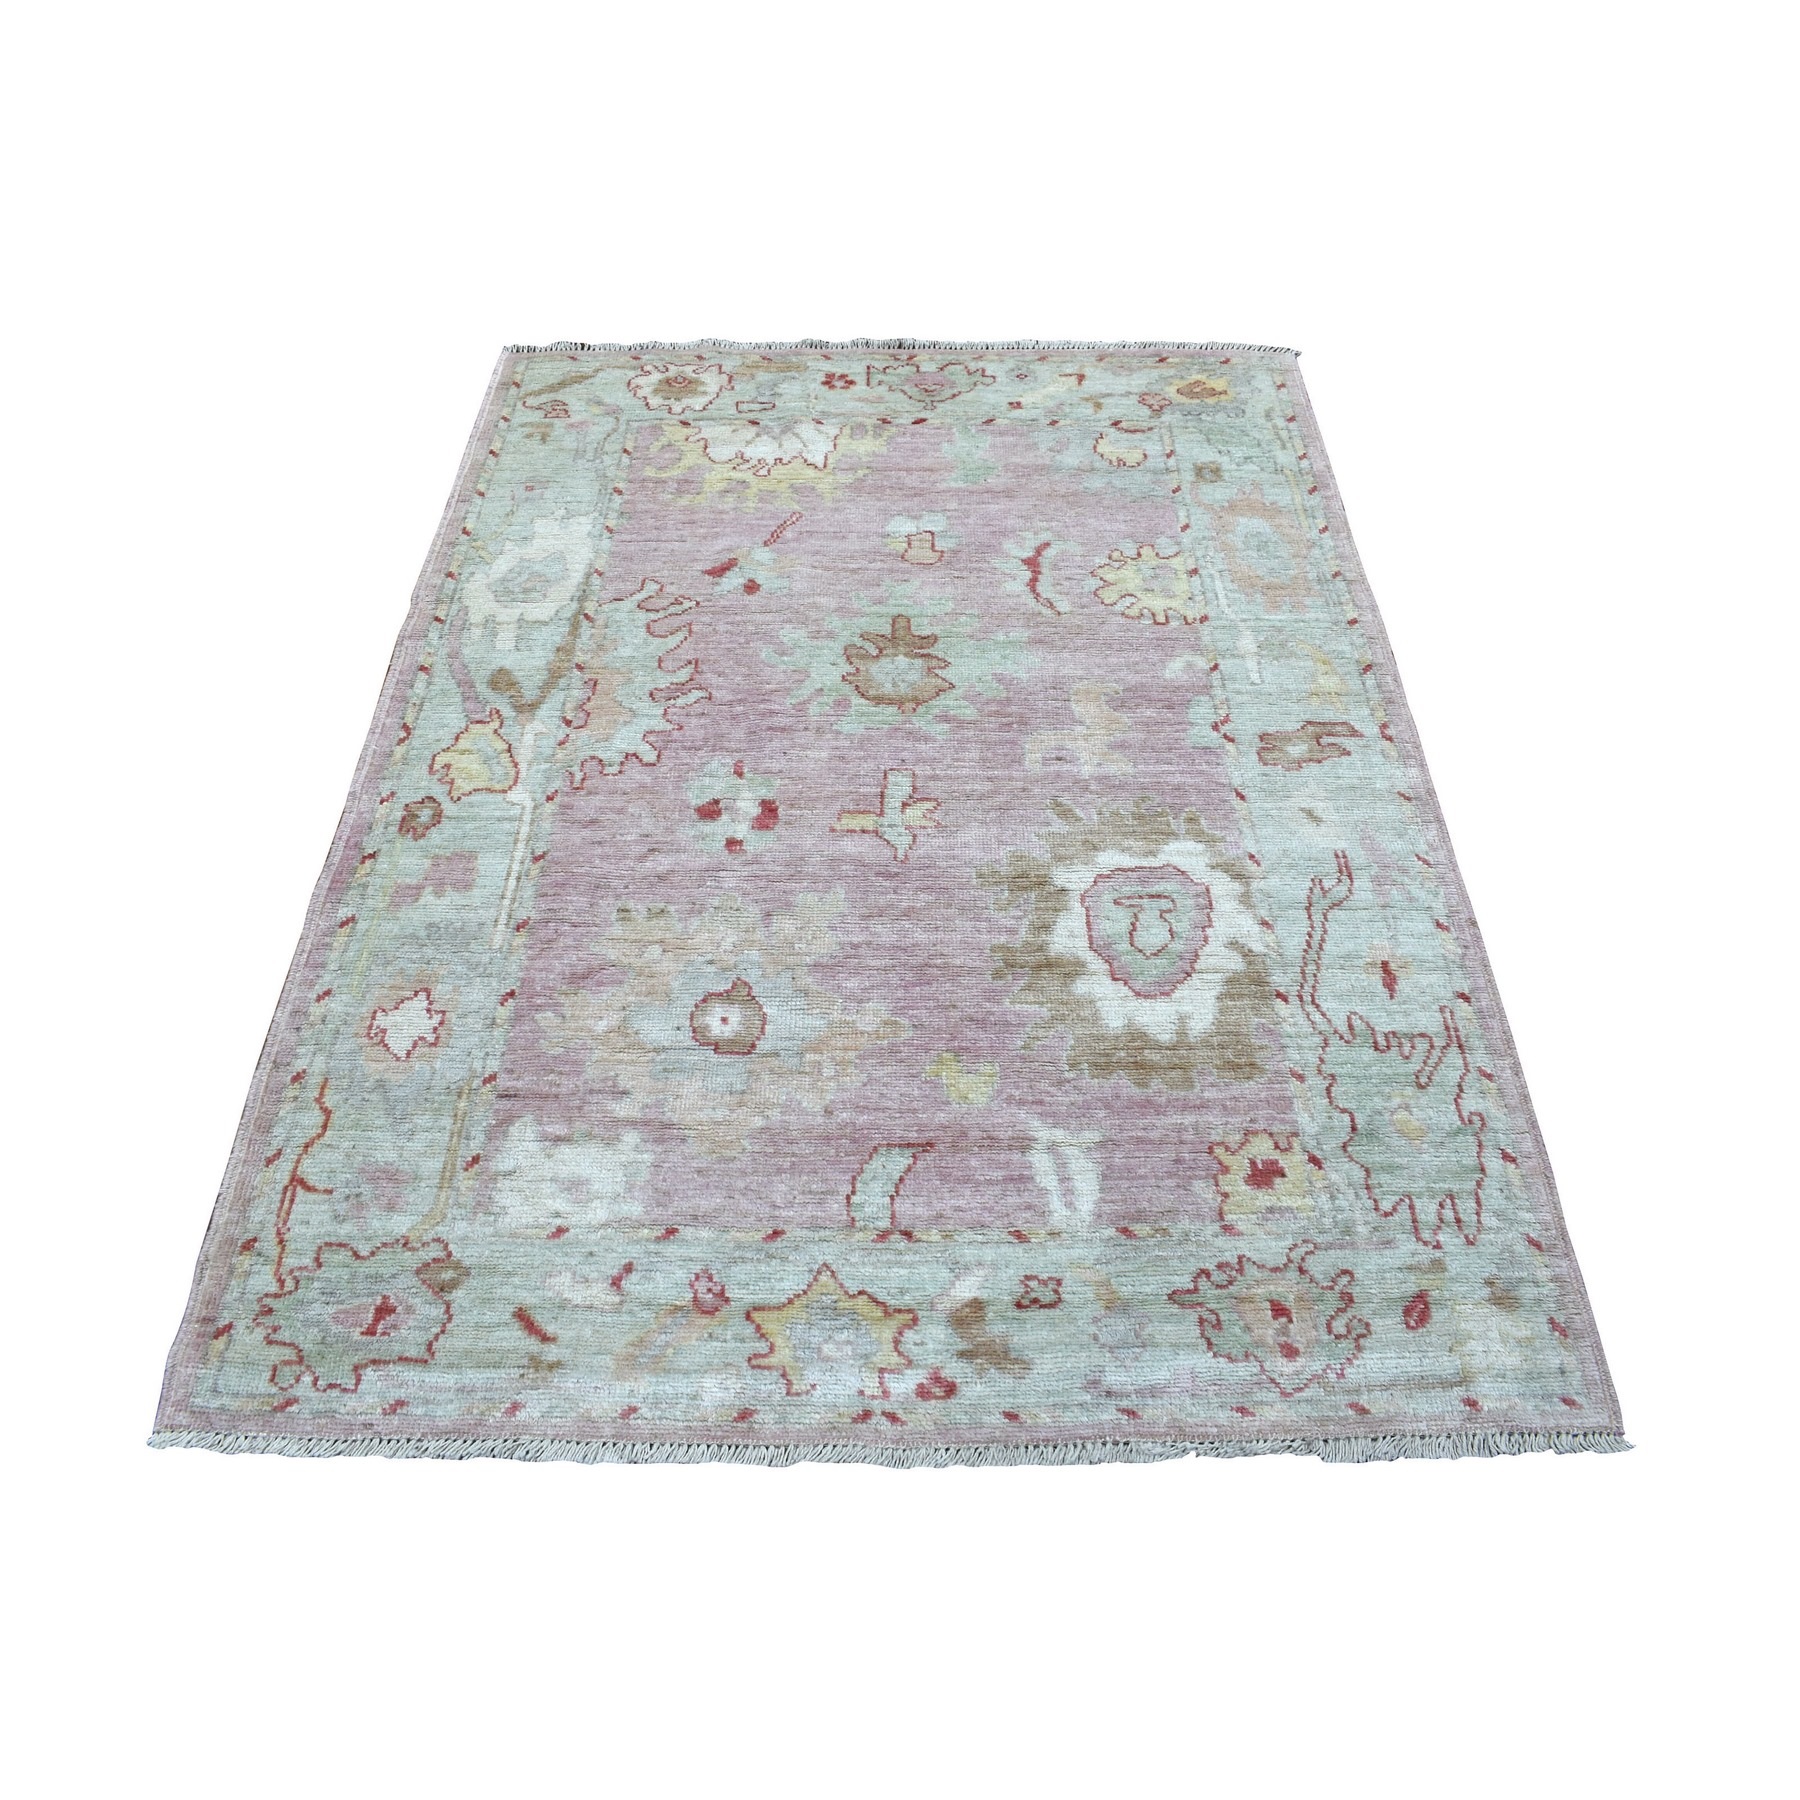 4'3"x6' Supple and Pliable Wool Pink Angora Oushak with Colorful Motifs Hand Woven Oriental Rug 